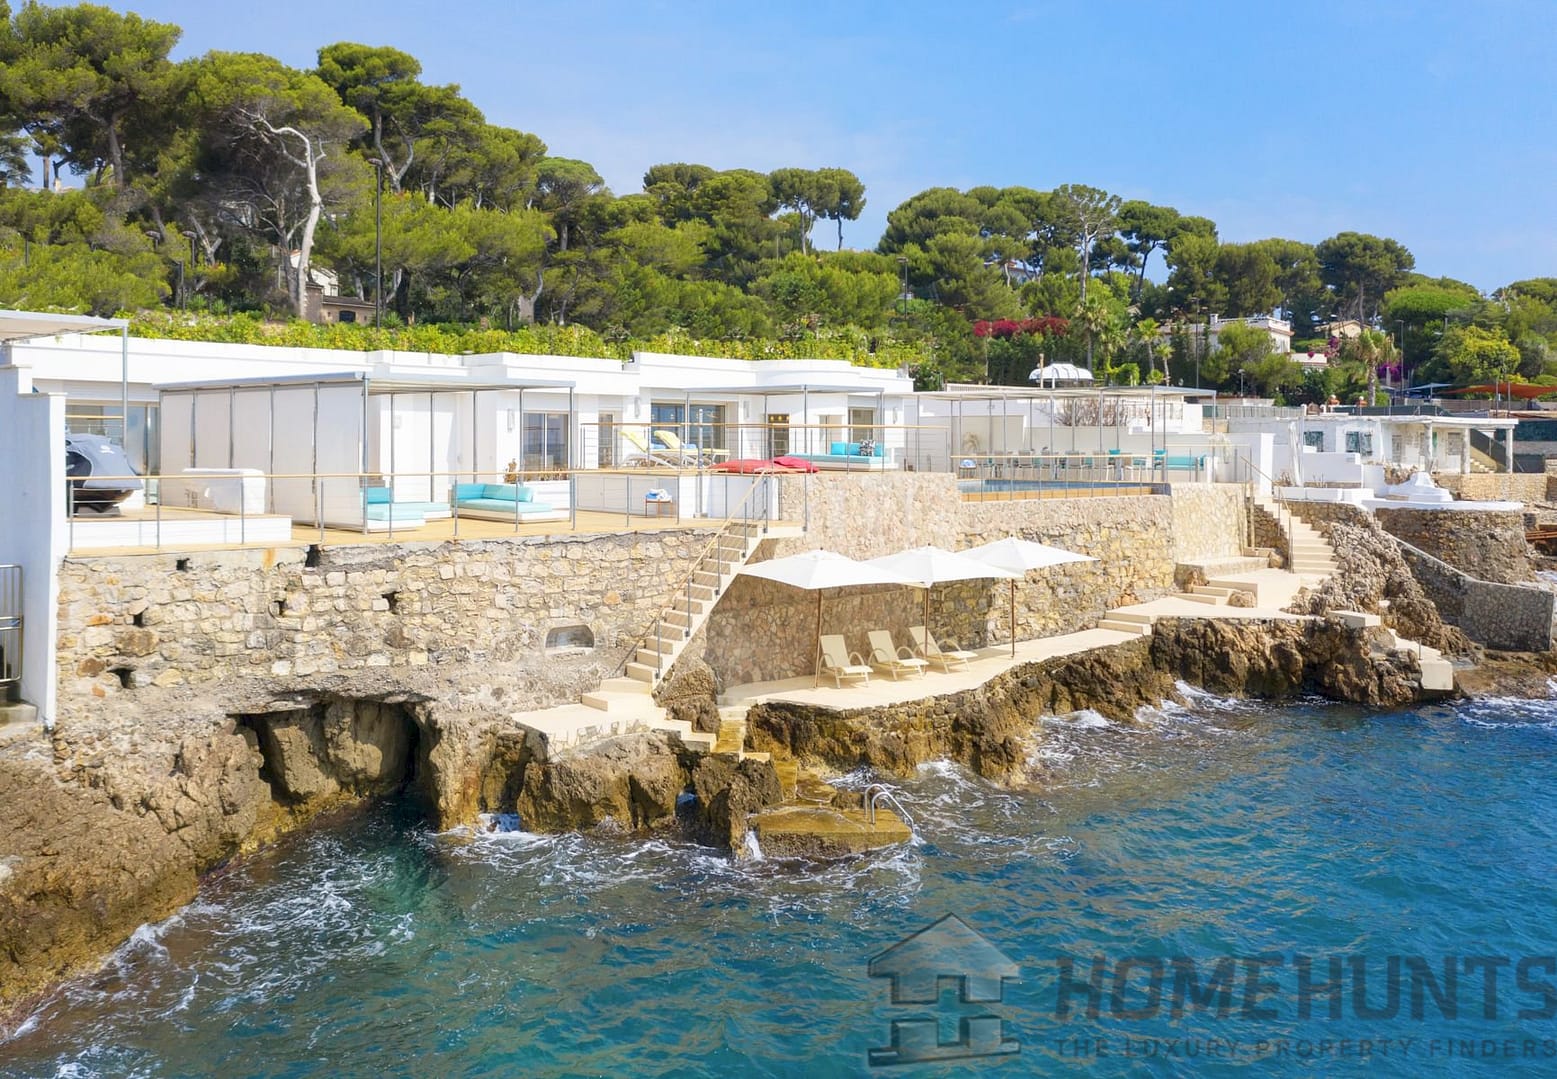 Villa/House For Sale in Cap D Antibes 17